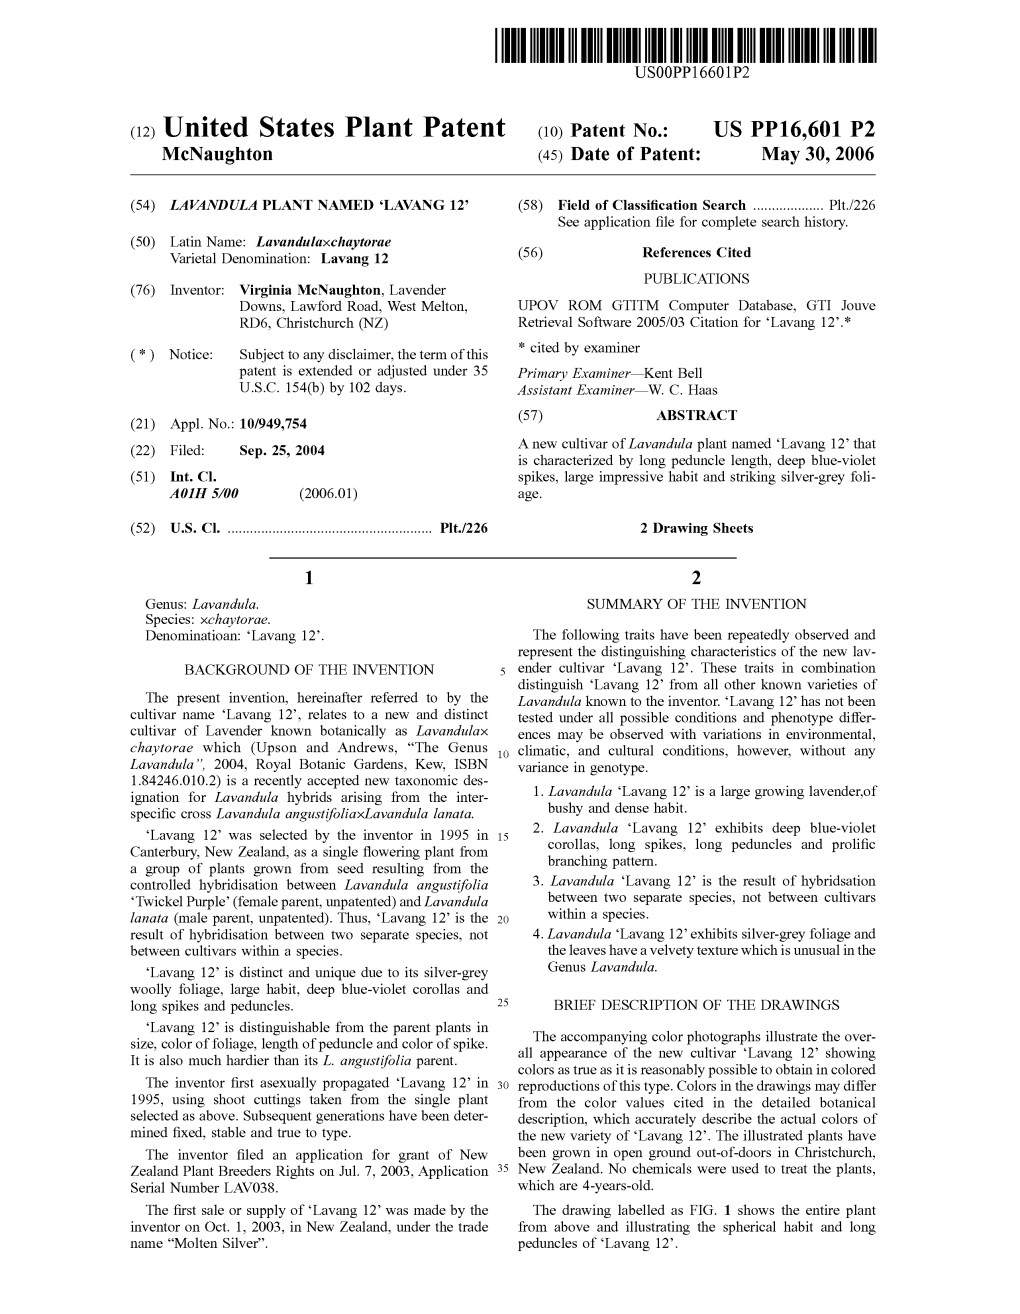 (12) United States Plant Patent (10) Patent No.: US PP16,601 P2 Mcnaughton (45) Date of Patent: May 30, 2006